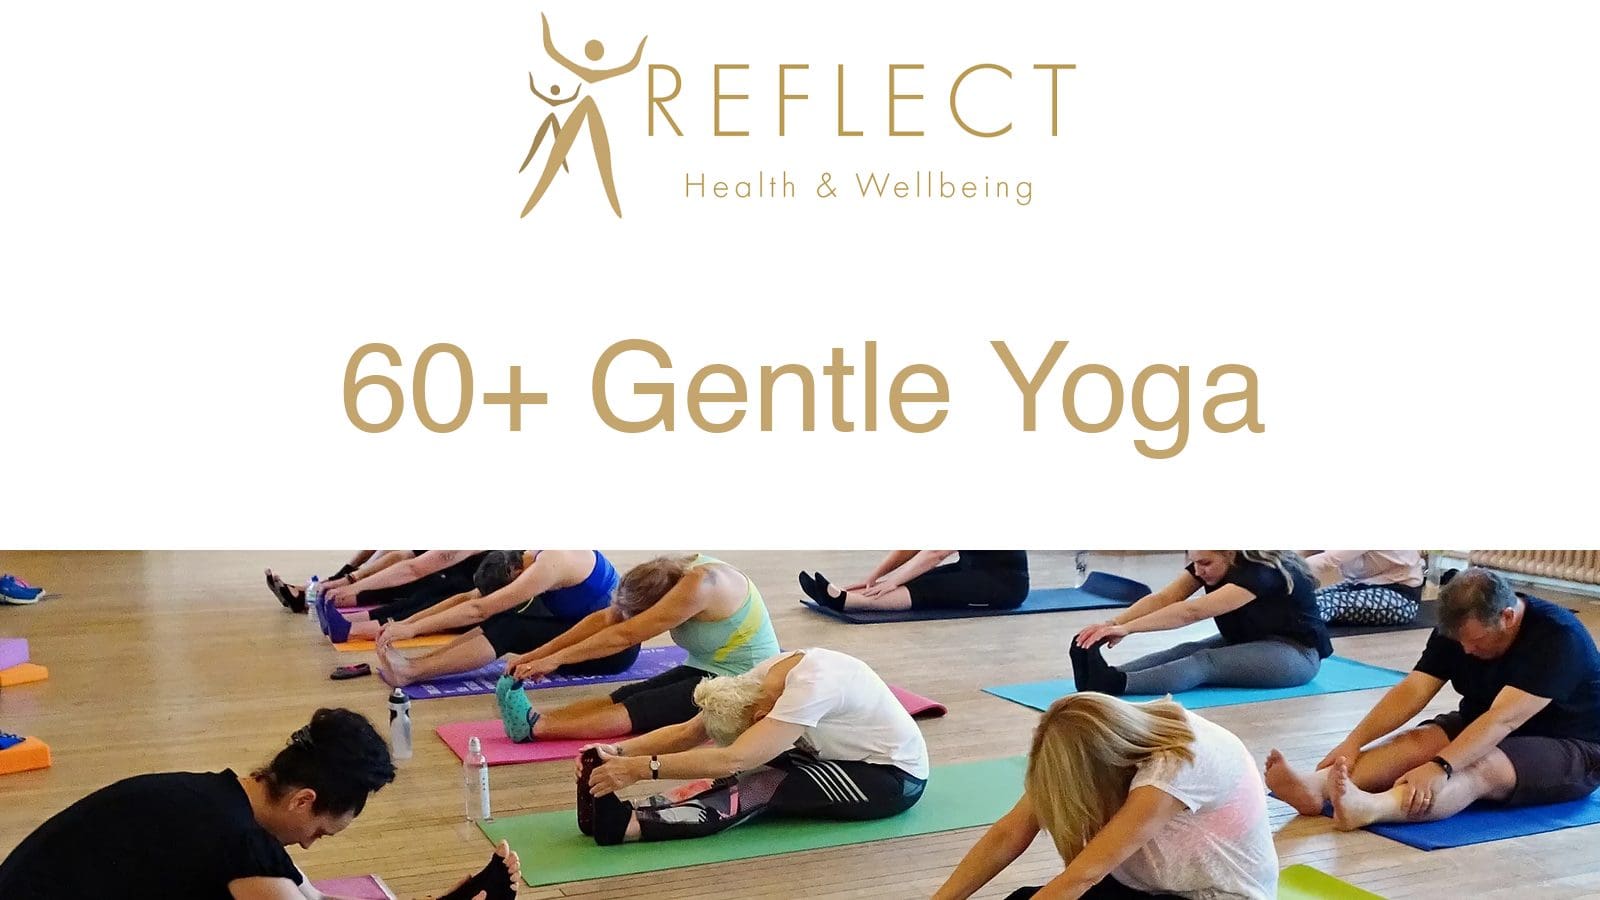 60+ Gentle Yoga with Reflect Health and Wellbeing - Thetford Bubbly Hub